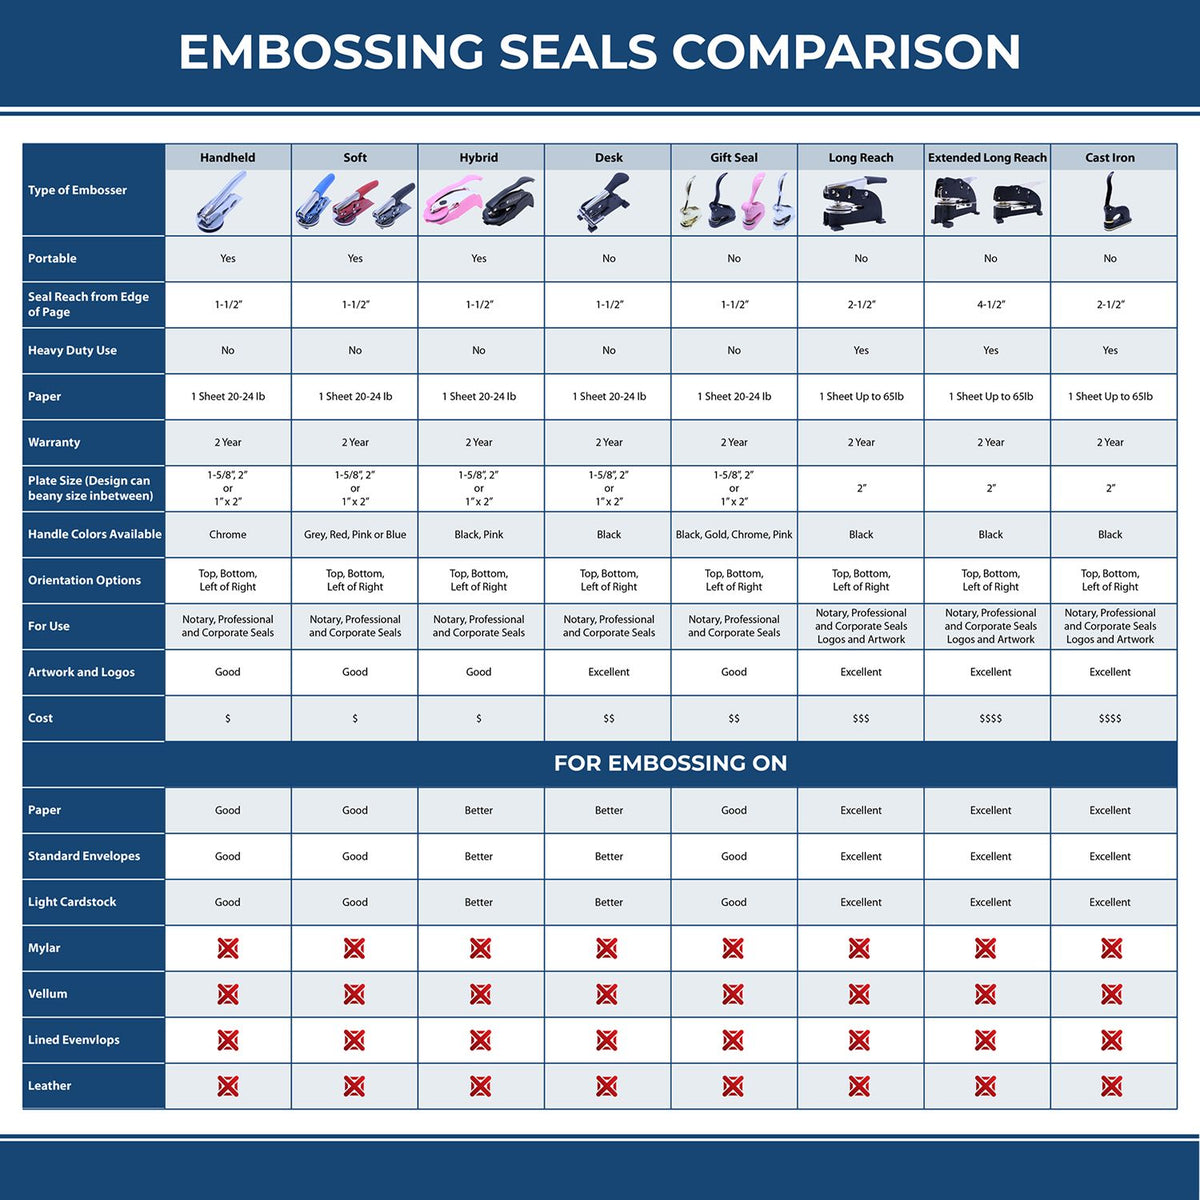 A comparison chart for the different types of mount models available for the Handheld New York Professional Geologist Embosser